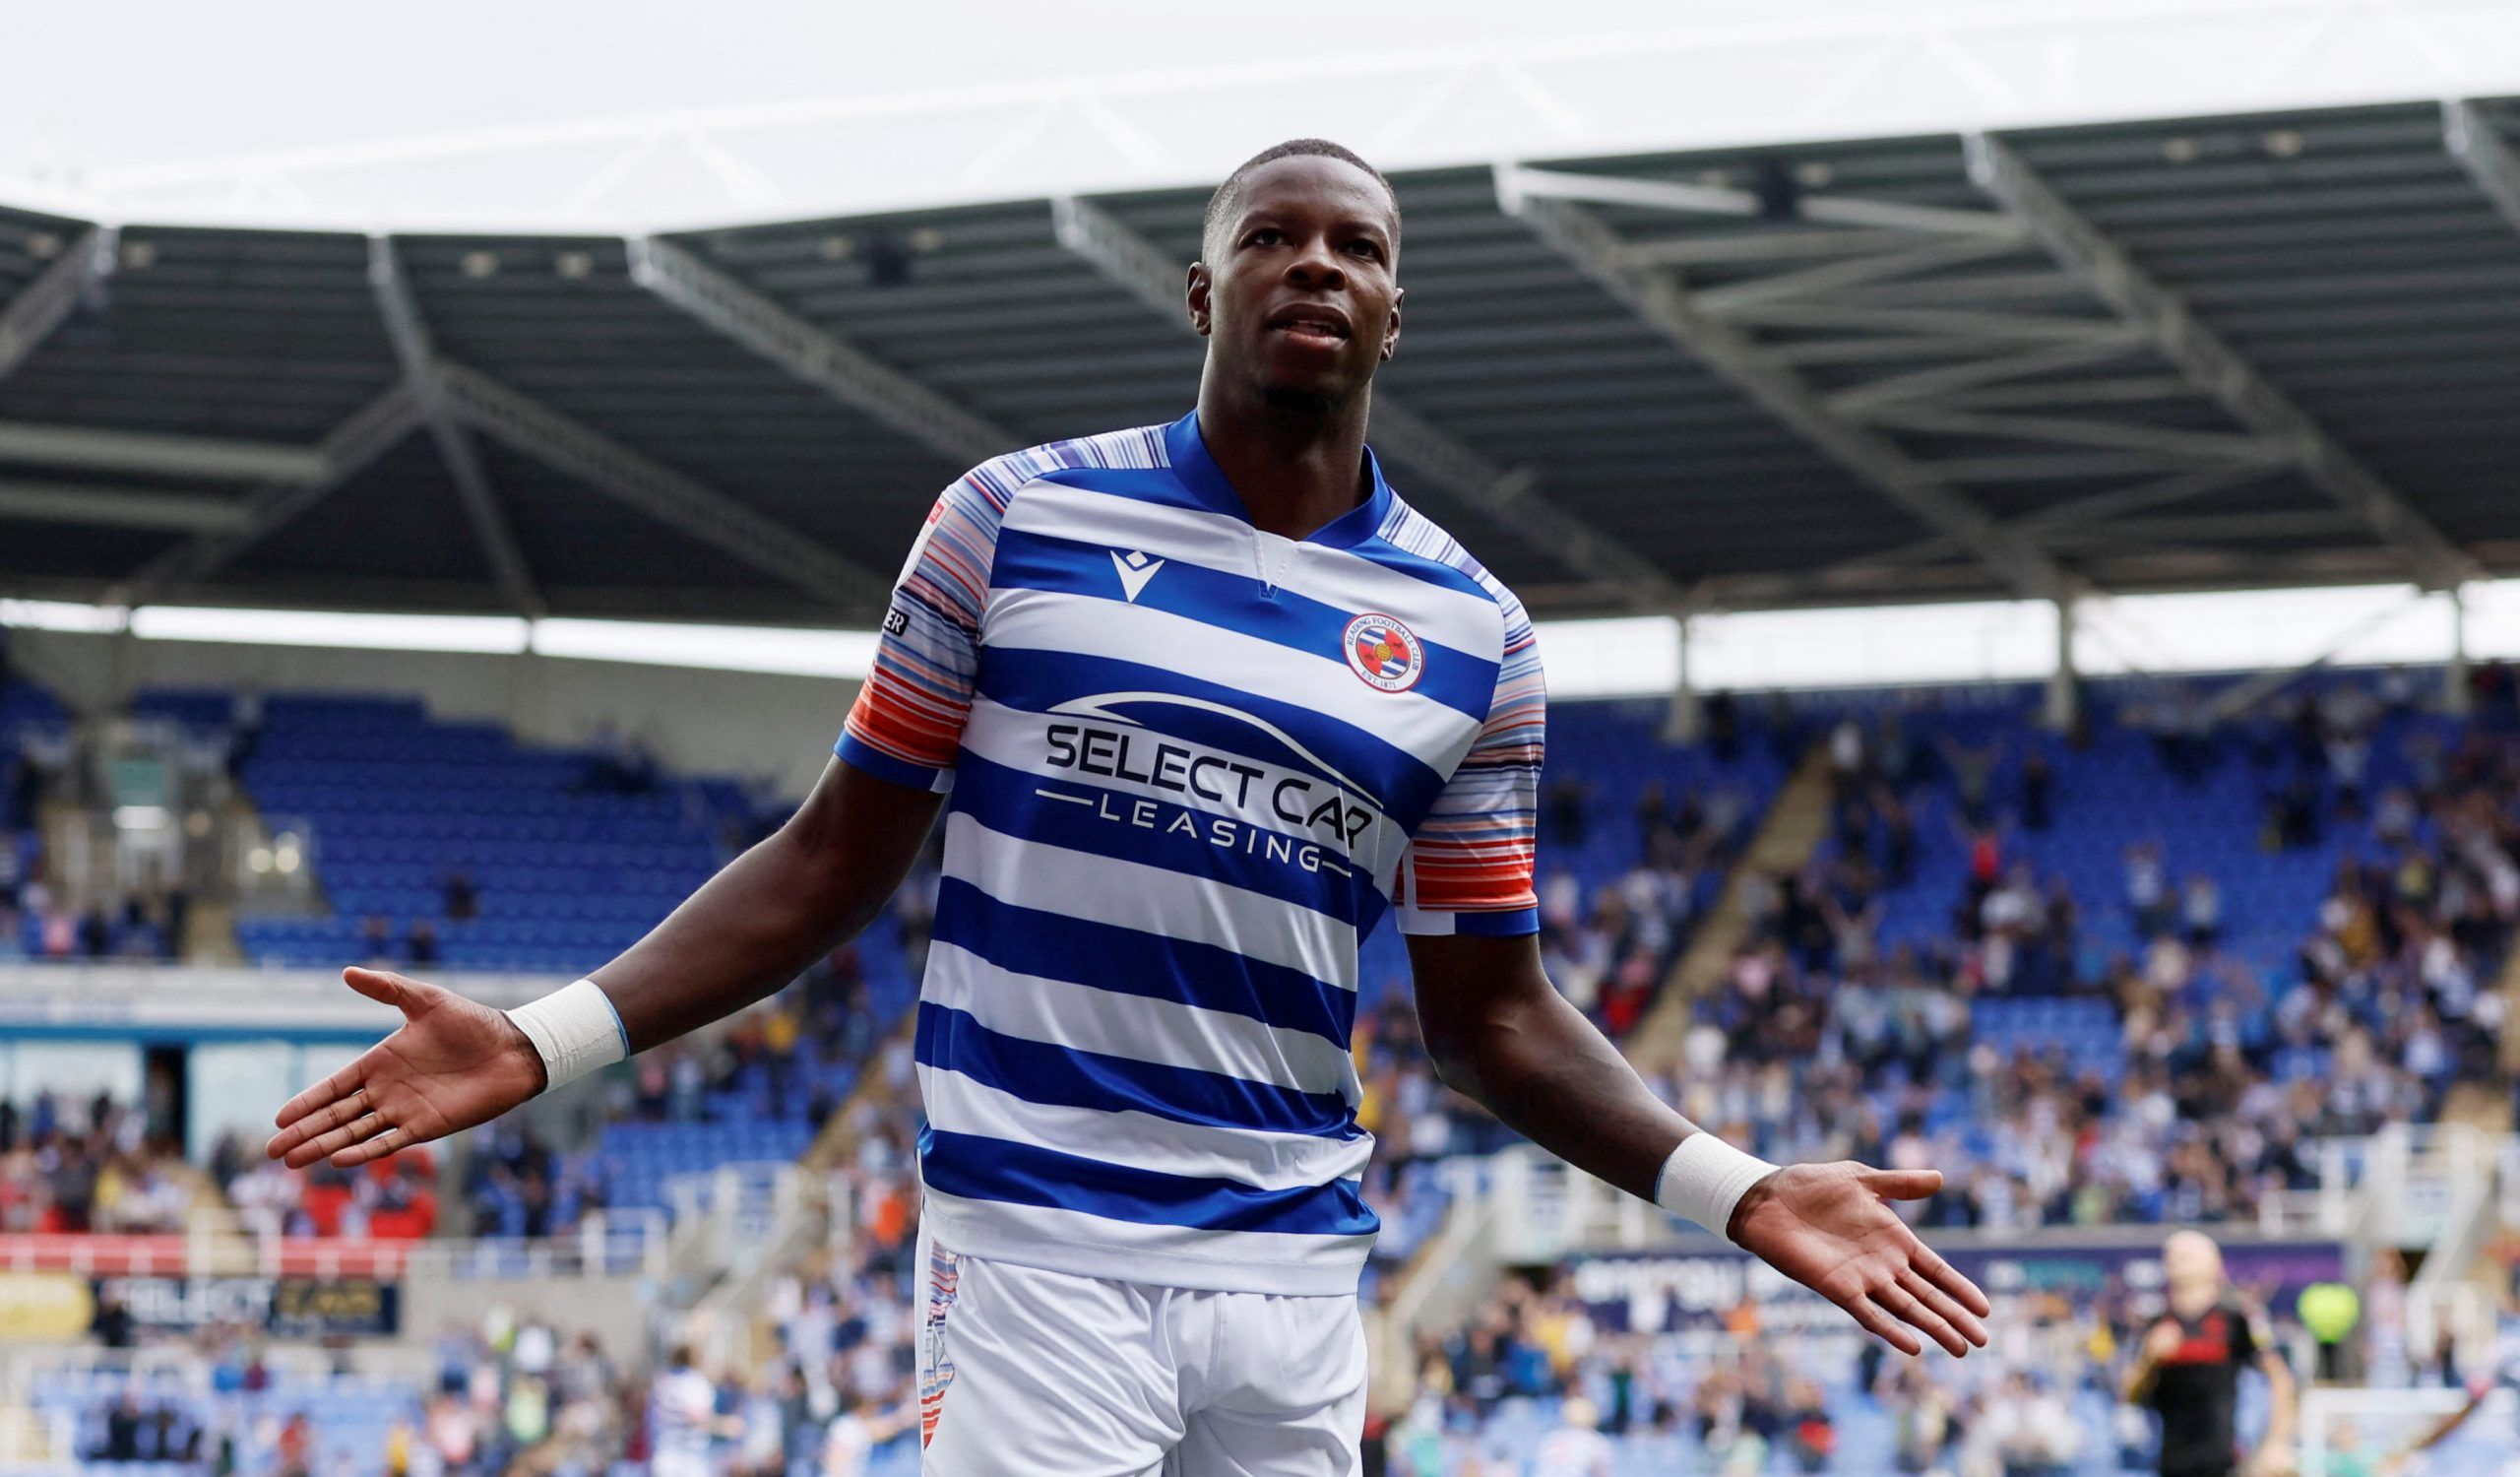 Soccer Football - Championship - Reading v Stoke City - Madejski Stadium, Reading, Britain - September 4, 2022 Reading's Lucas Joao celebrates scoring their first goal  Action Images/Andrew Couldridge  EDITORIAL USE ONLY. No use with unauthorized audio, video, data, fixture lists, club/league logos or 